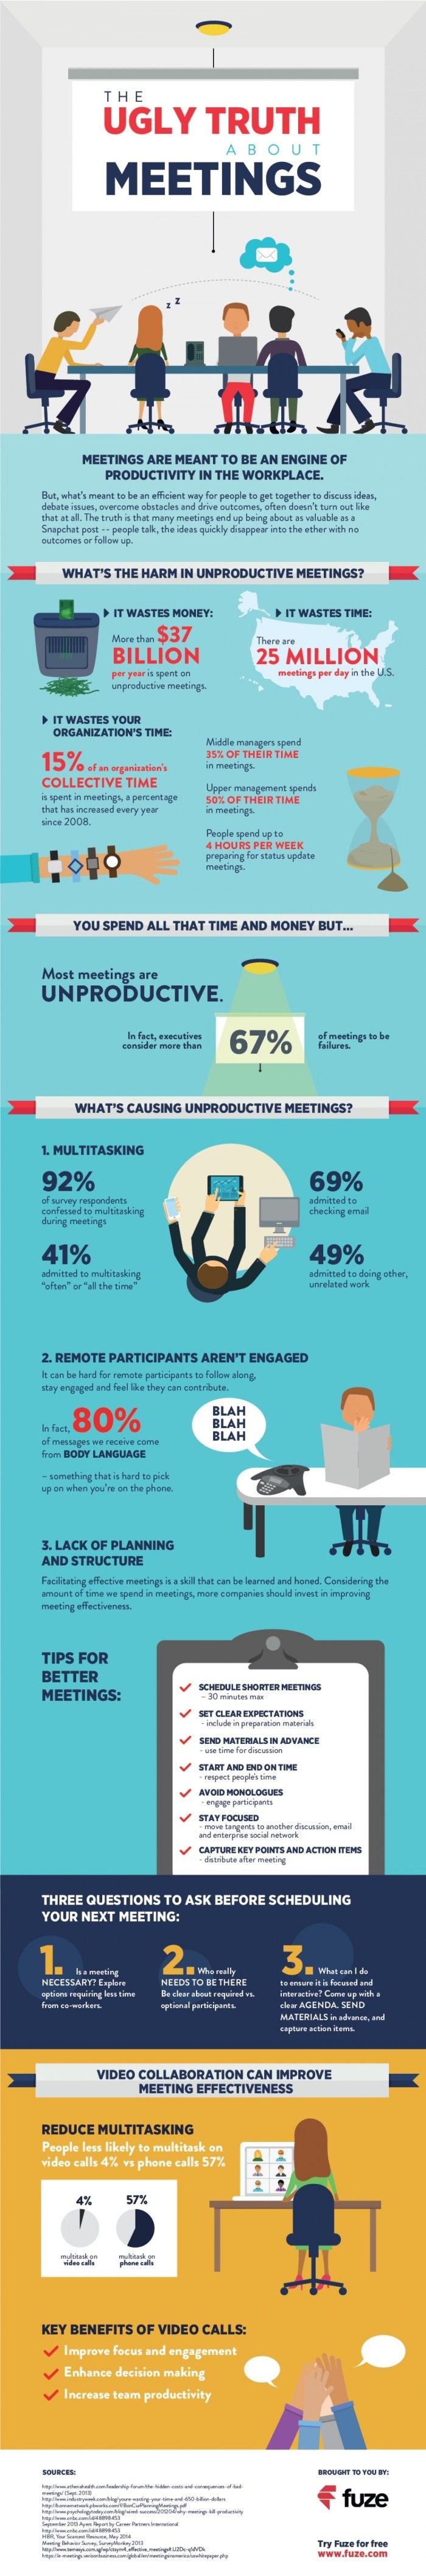 The Ugly Truth About Meetings [Infographic]